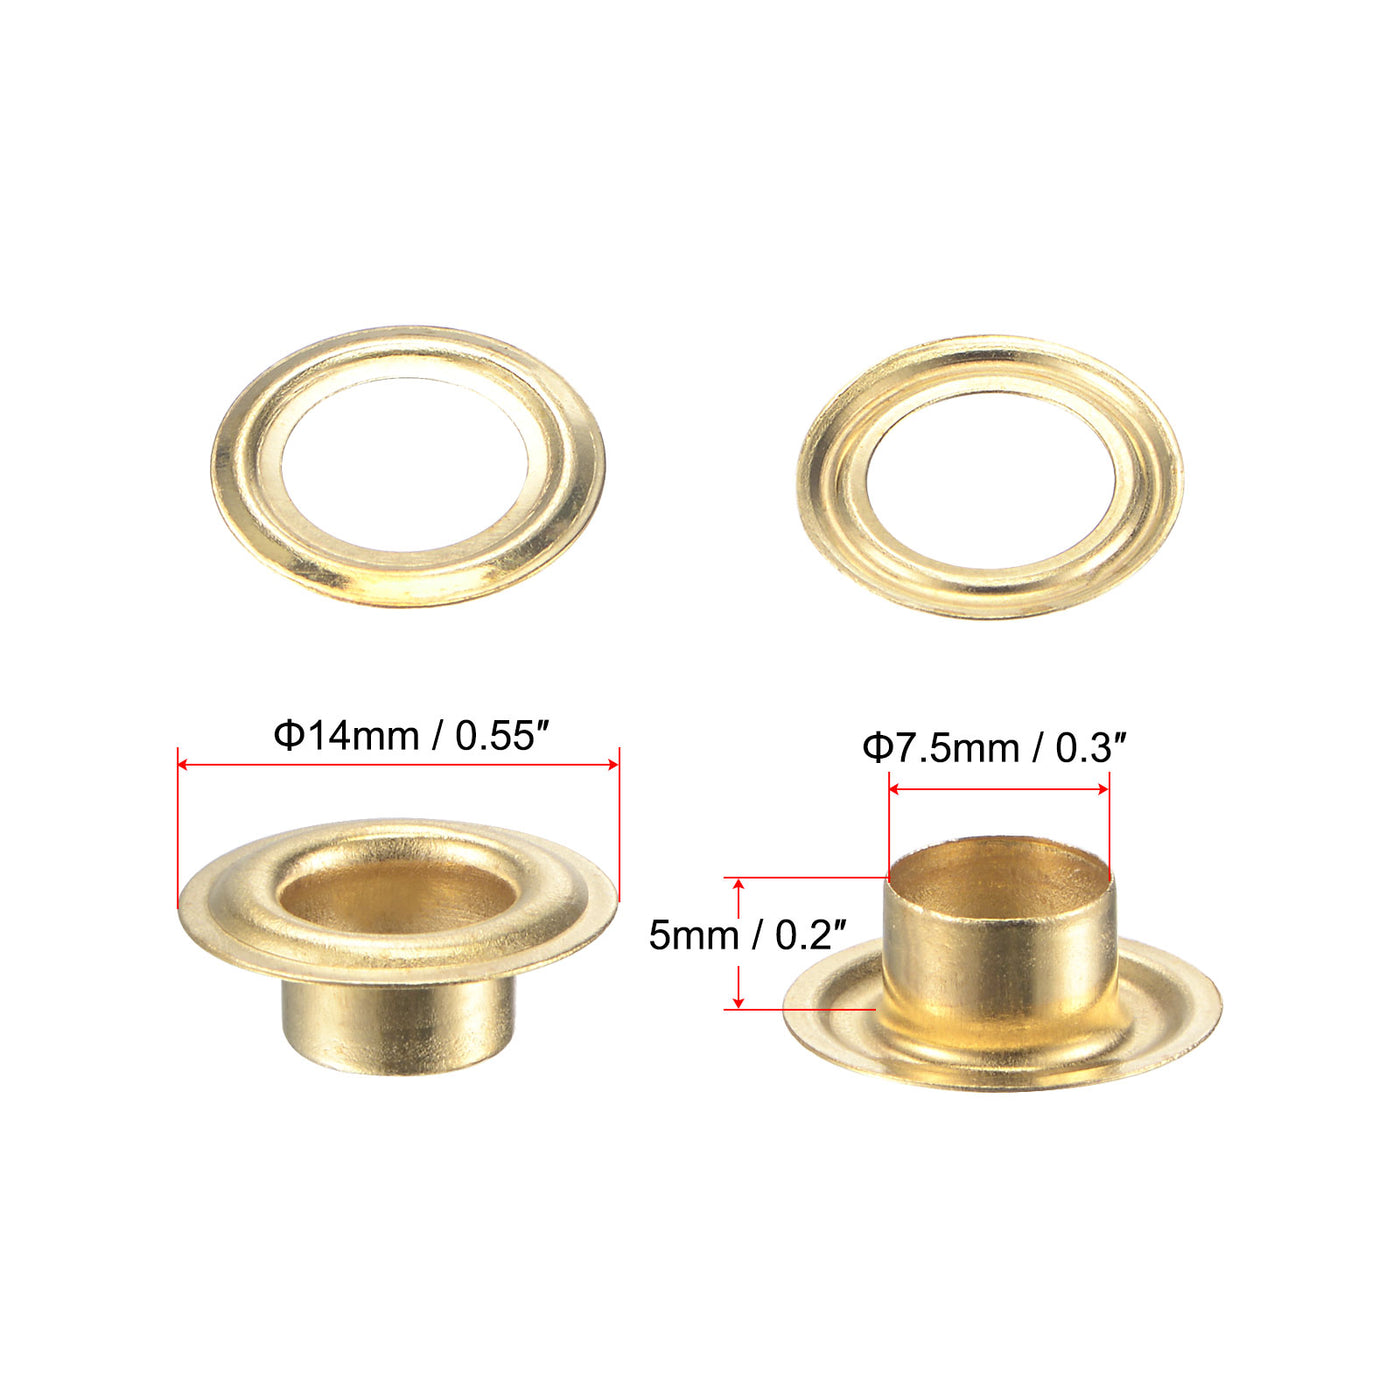 uxcell Uxcell 50Set 7.5mm Hole Copper Grommets Eyelets Gold Tone for Fabric Leather